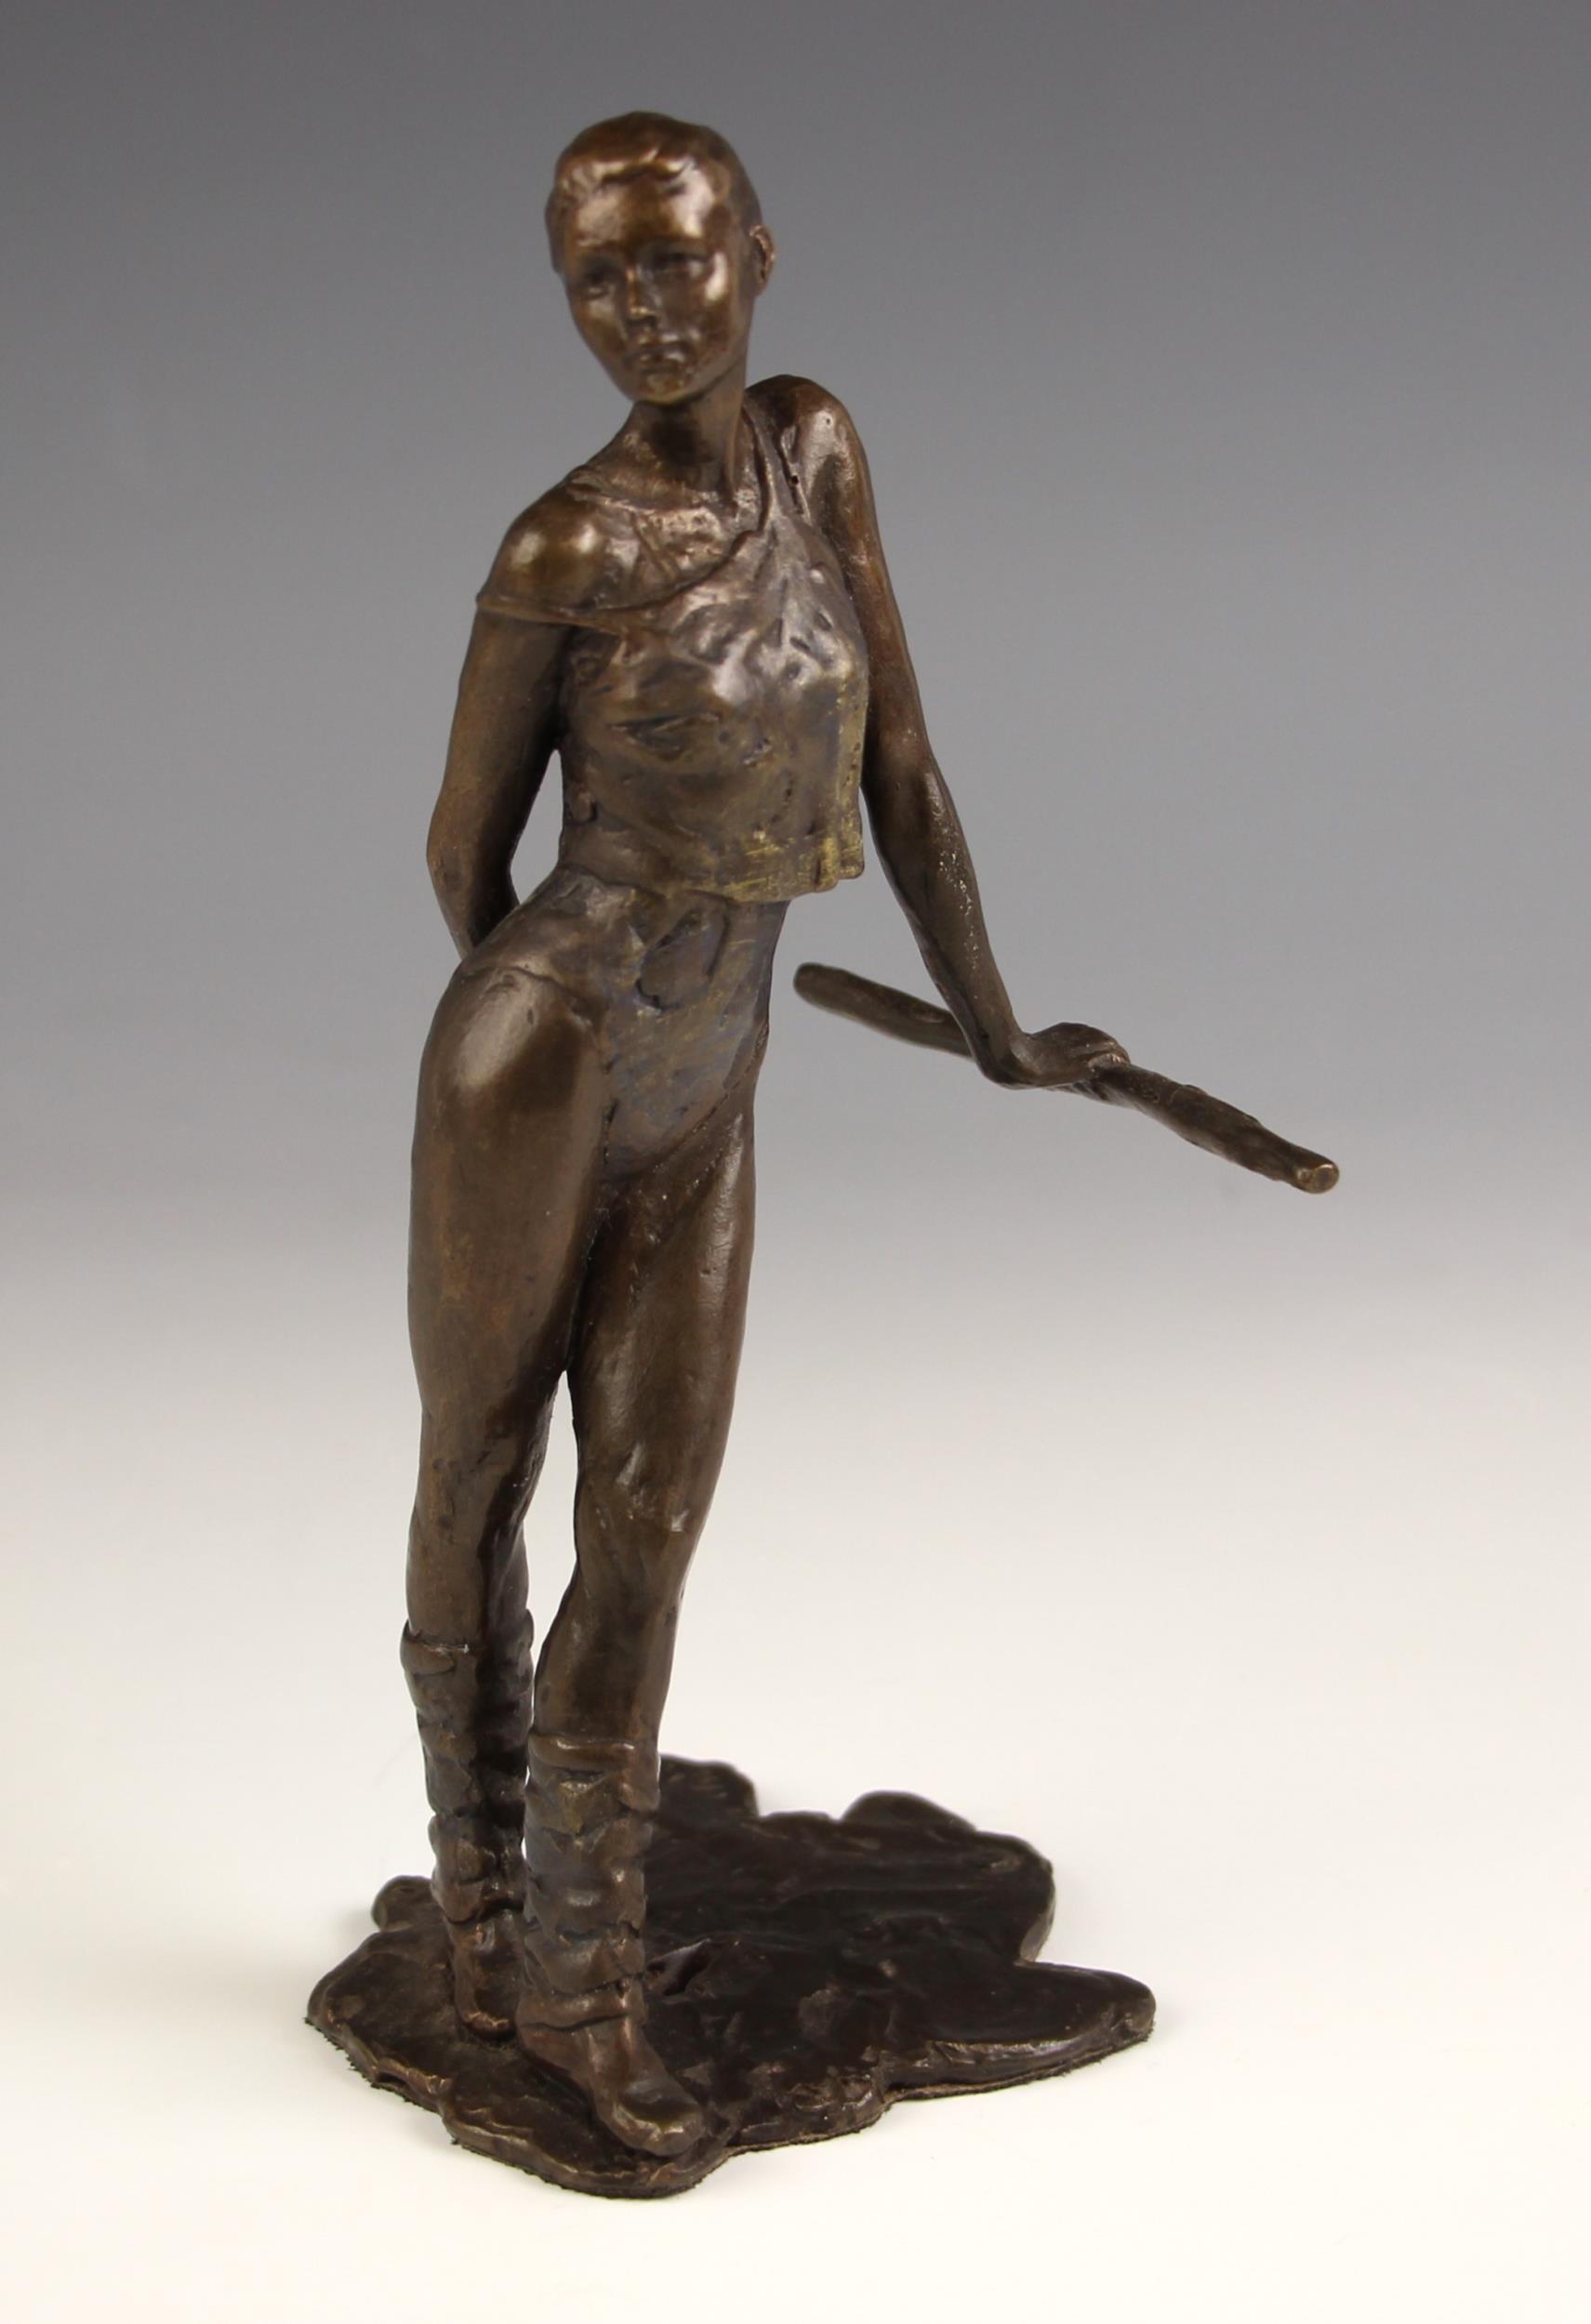 A limited edition bronze figure modelled as a female dancer holding a baton, numbered '4/50' in